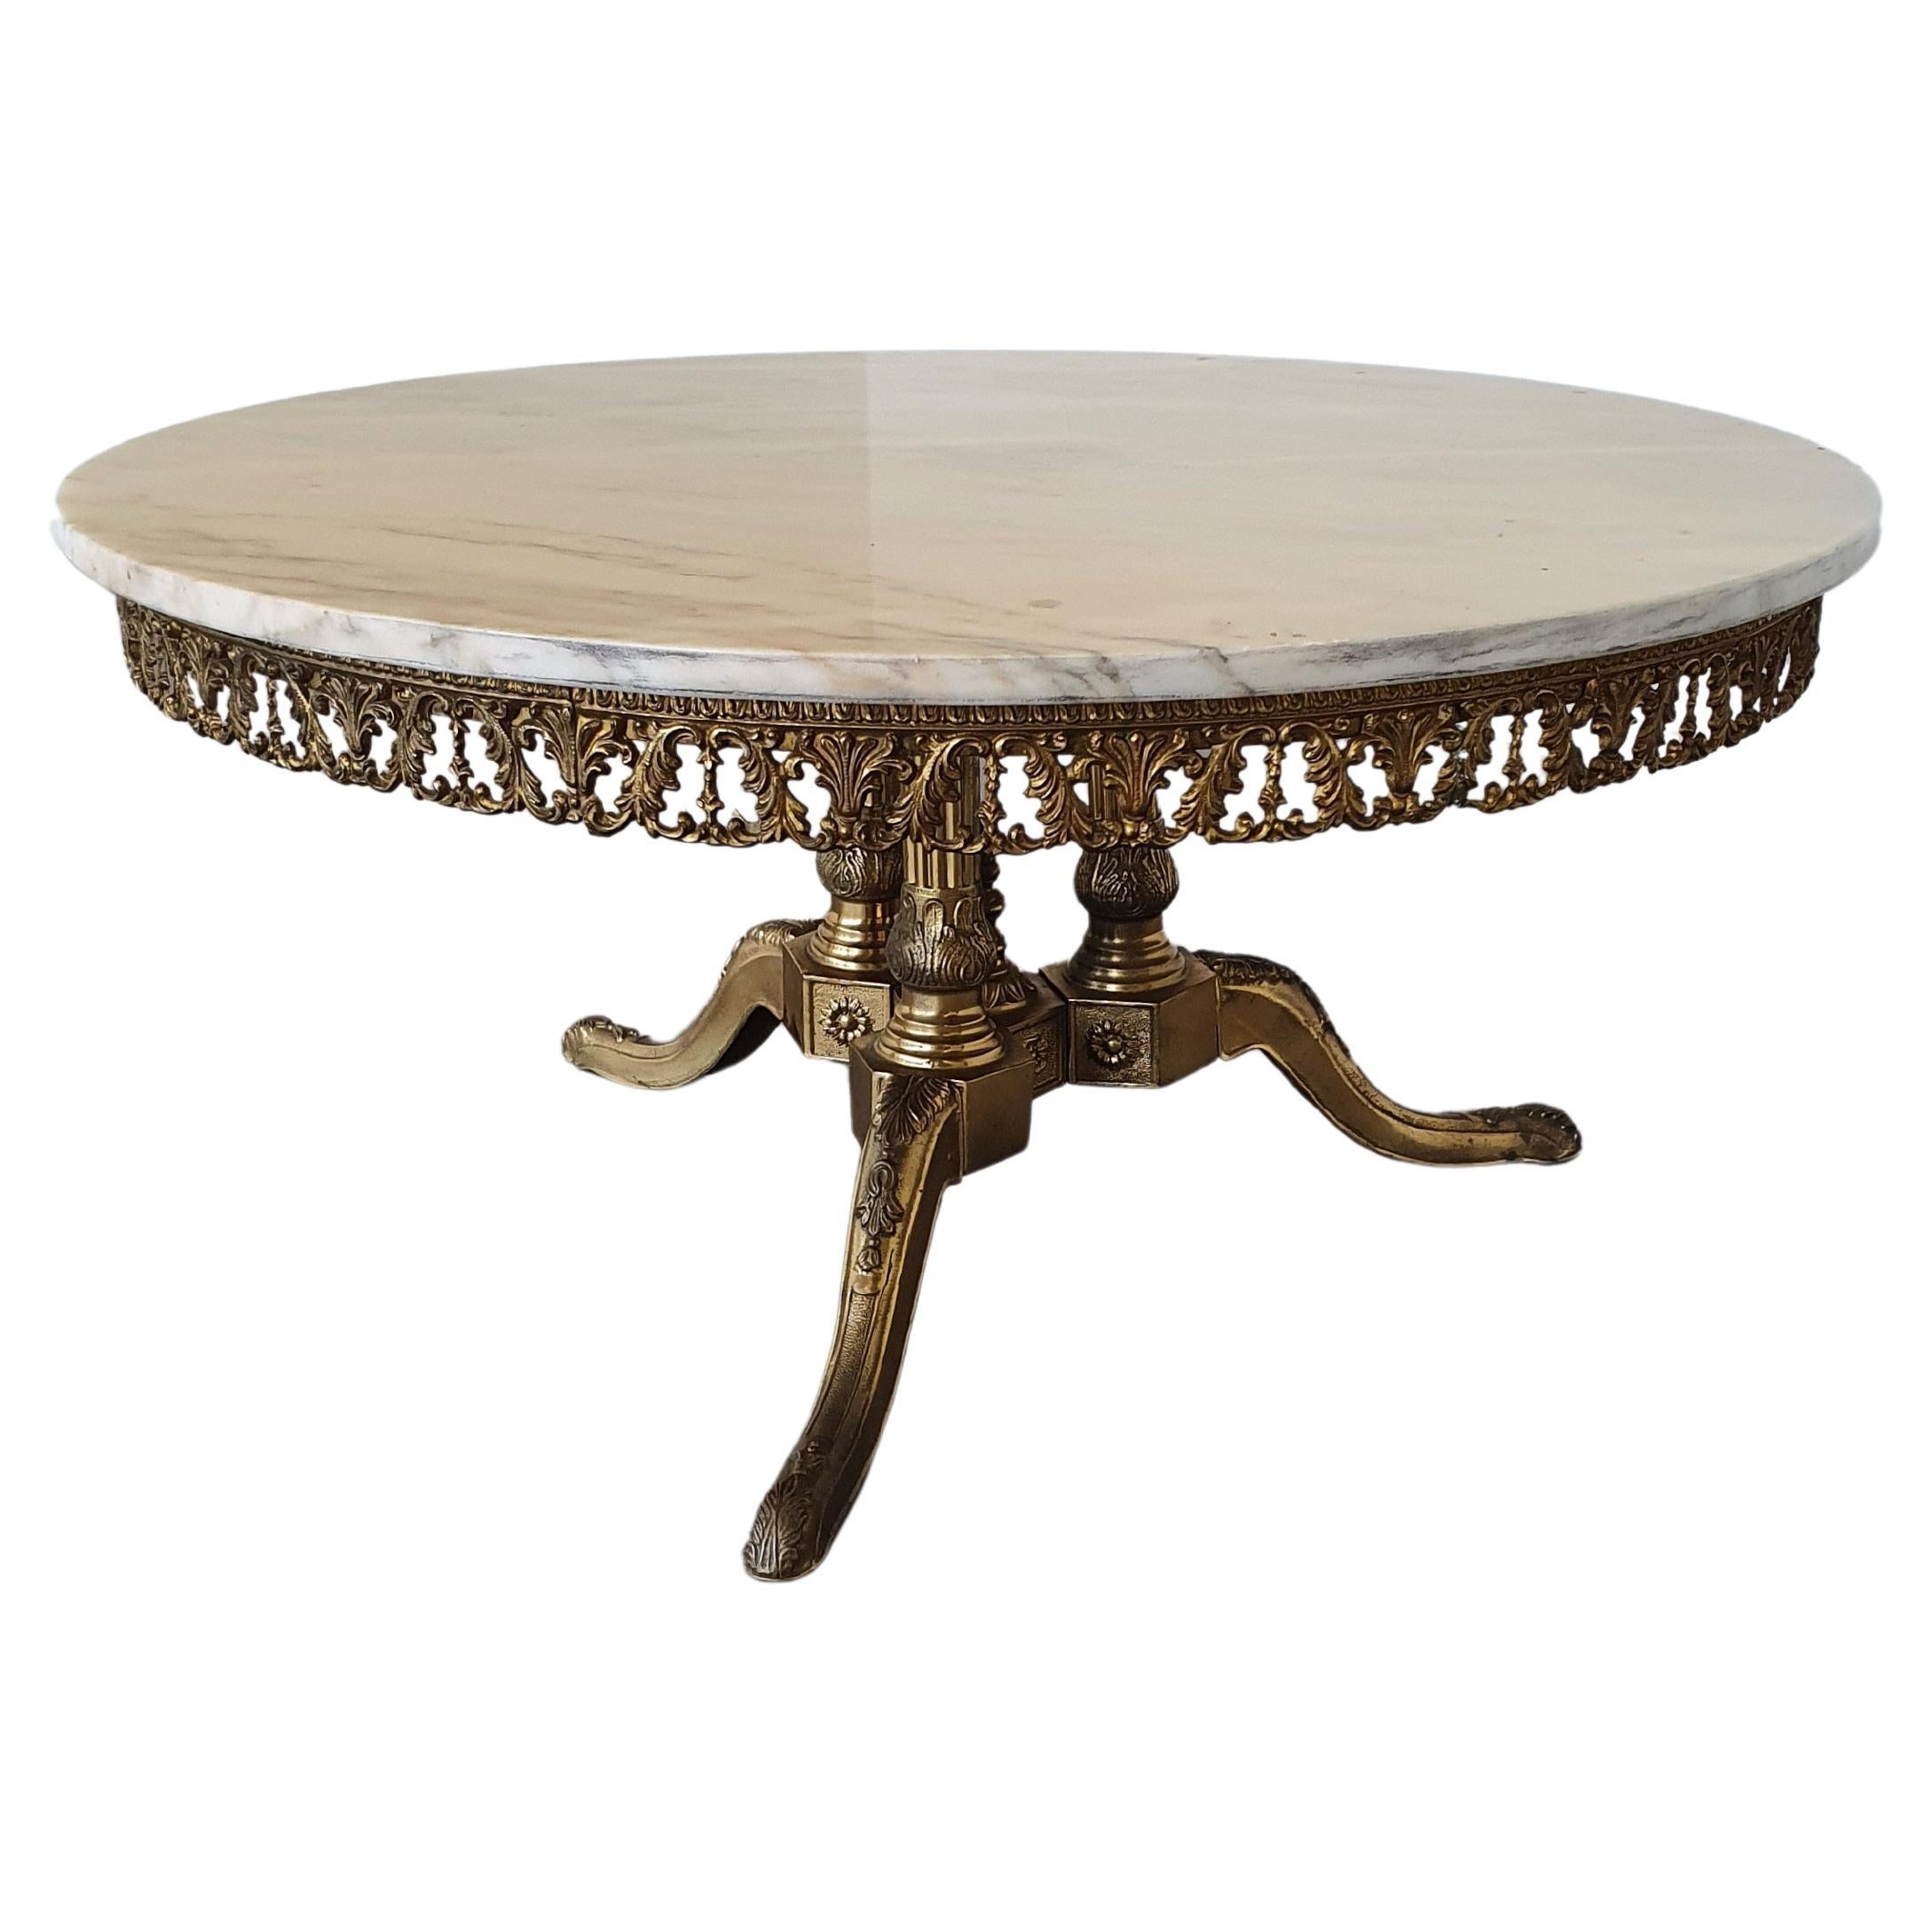 Marble coffee table / fire gilded base / Italian marble with beautiful collor For Sale